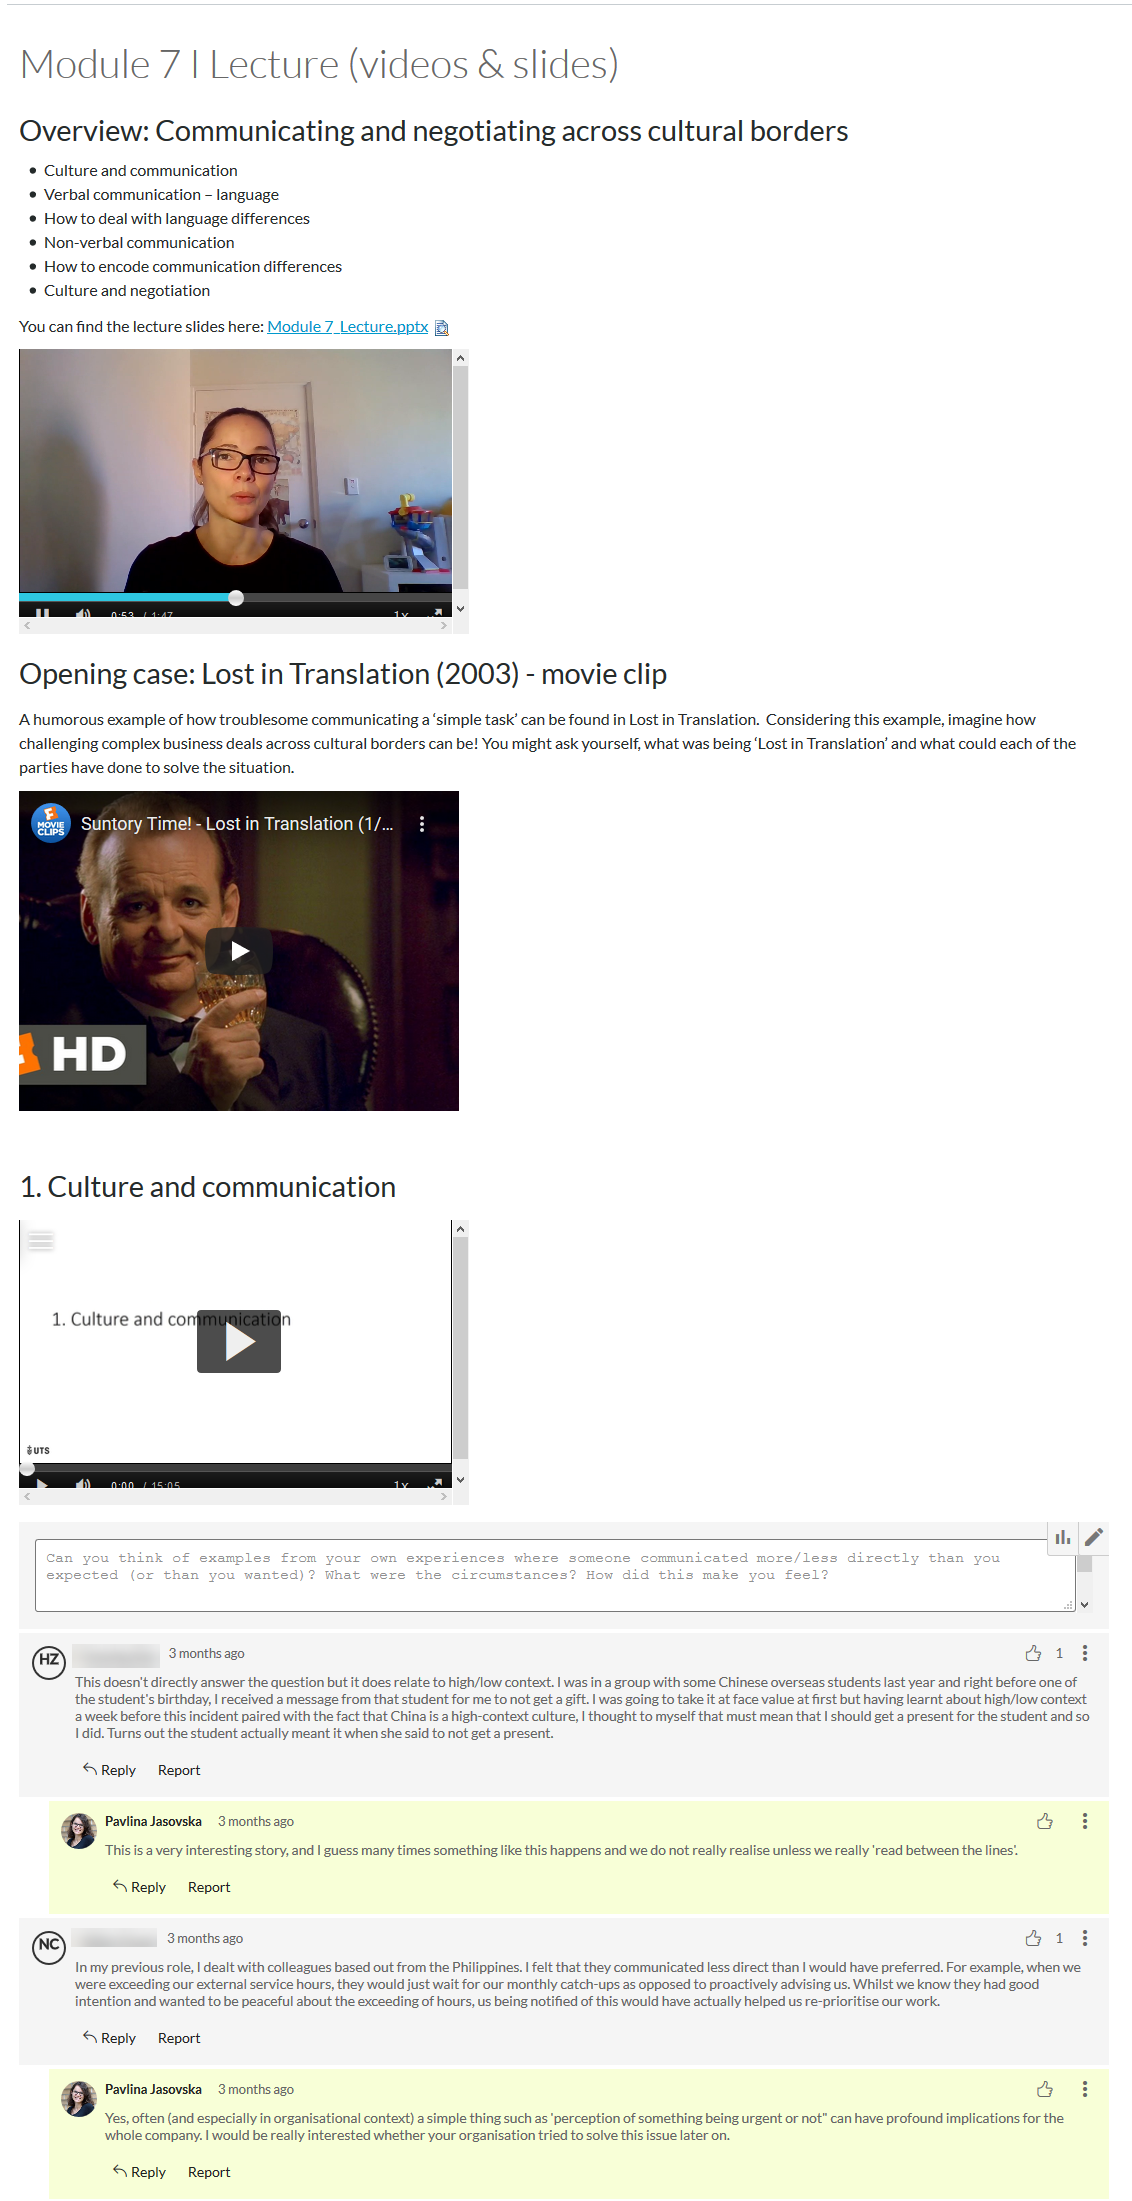 A Canvas page displaying a collection of short videos, which have been broken up with text and a comments box below to allow the students to engage.